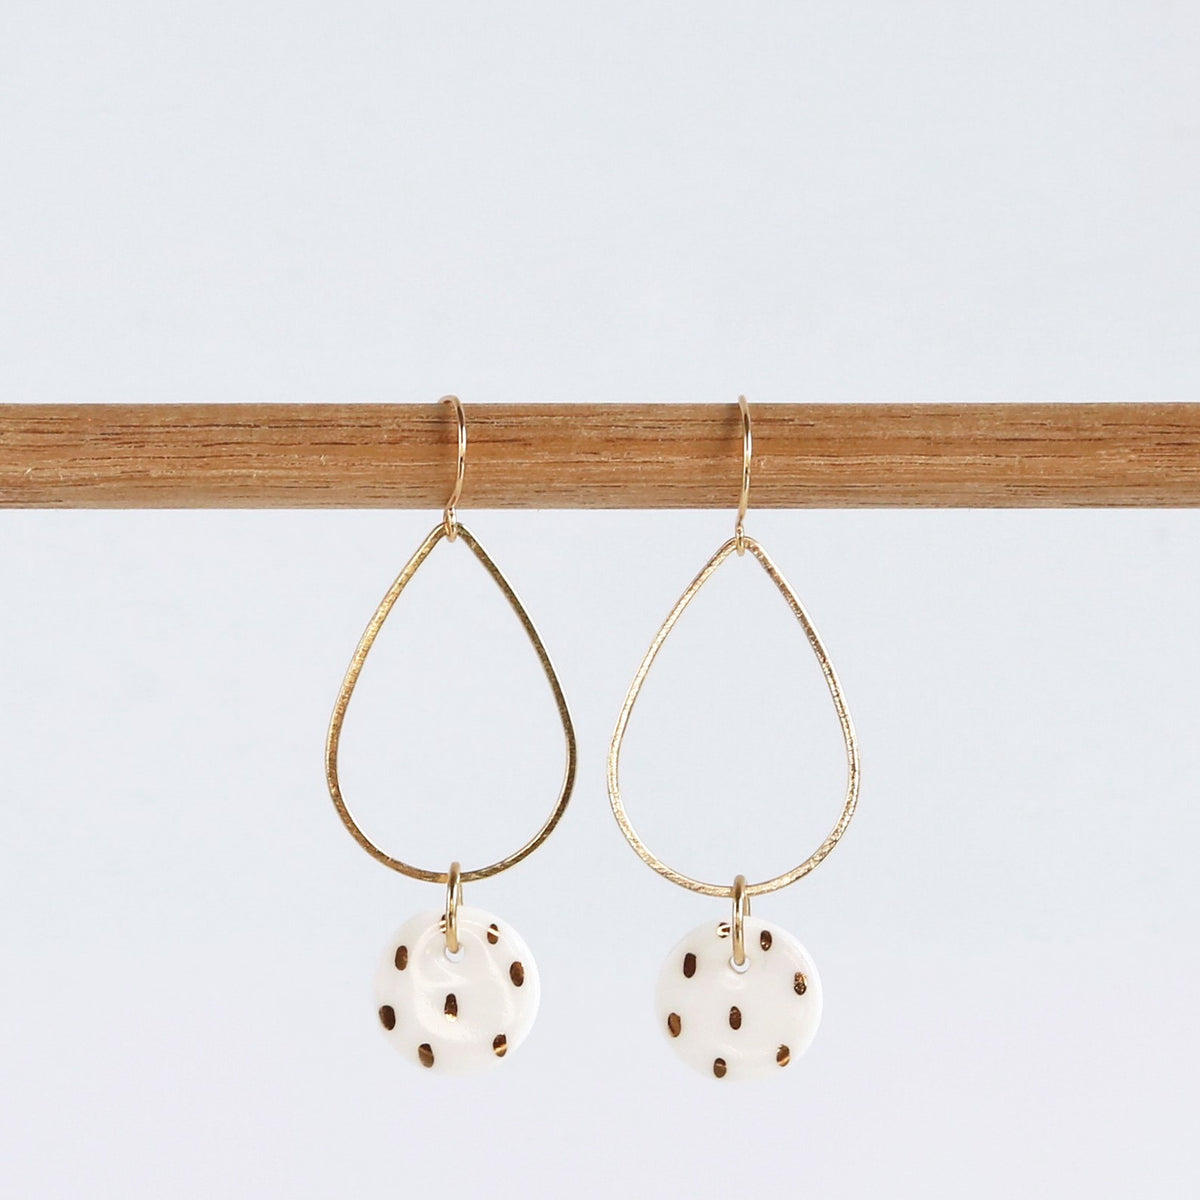 Large Tear Drop Earrings - White circle, gold dashes